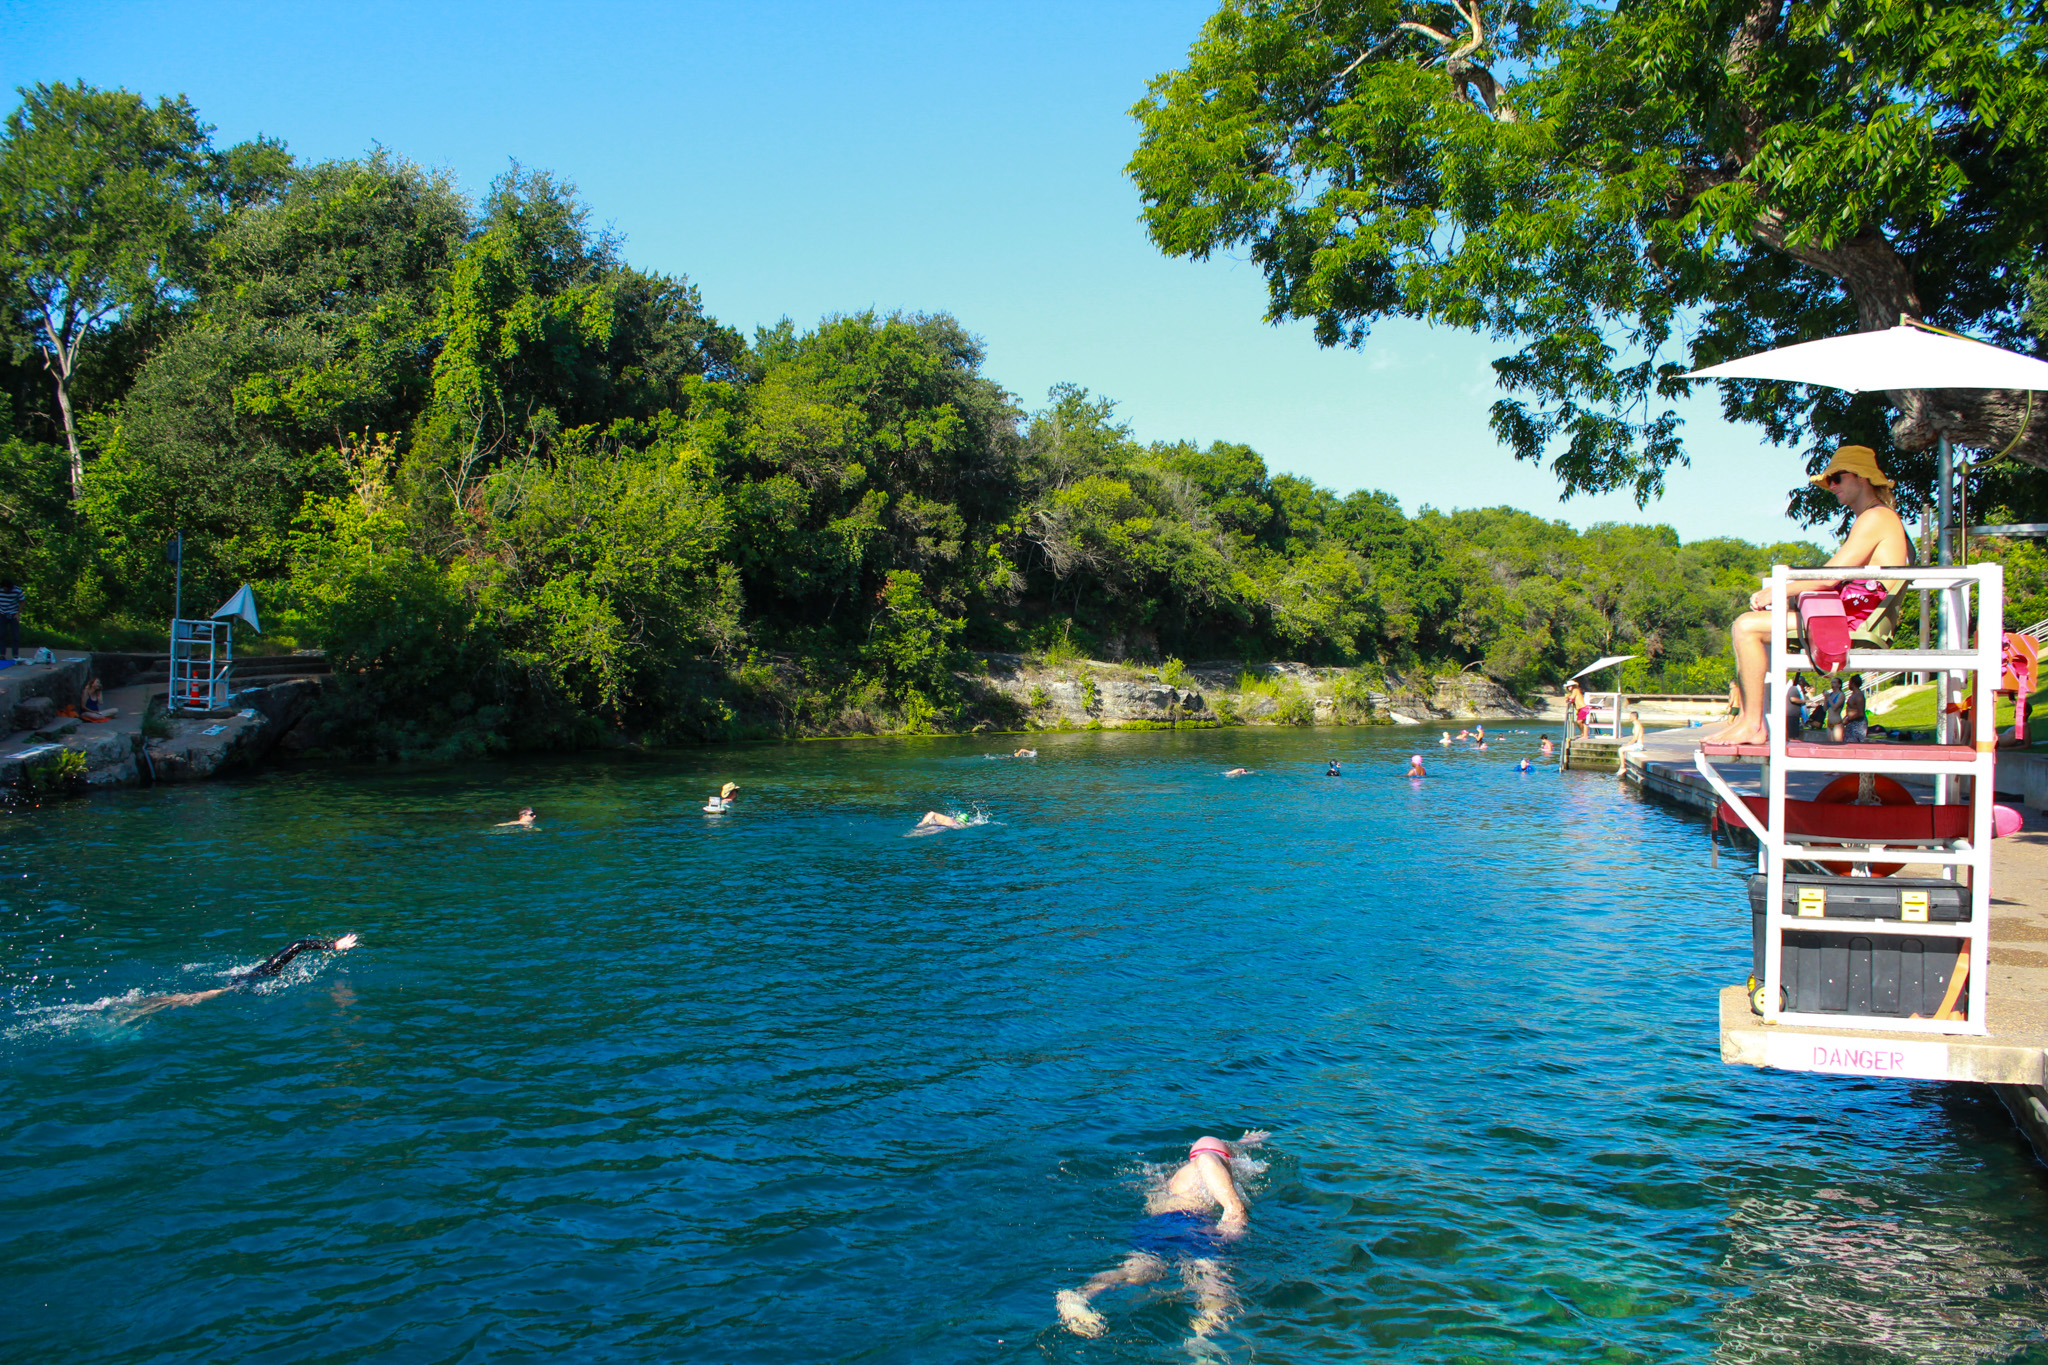 A view of Barton Springs pool will people swimming and a life guard on the side.